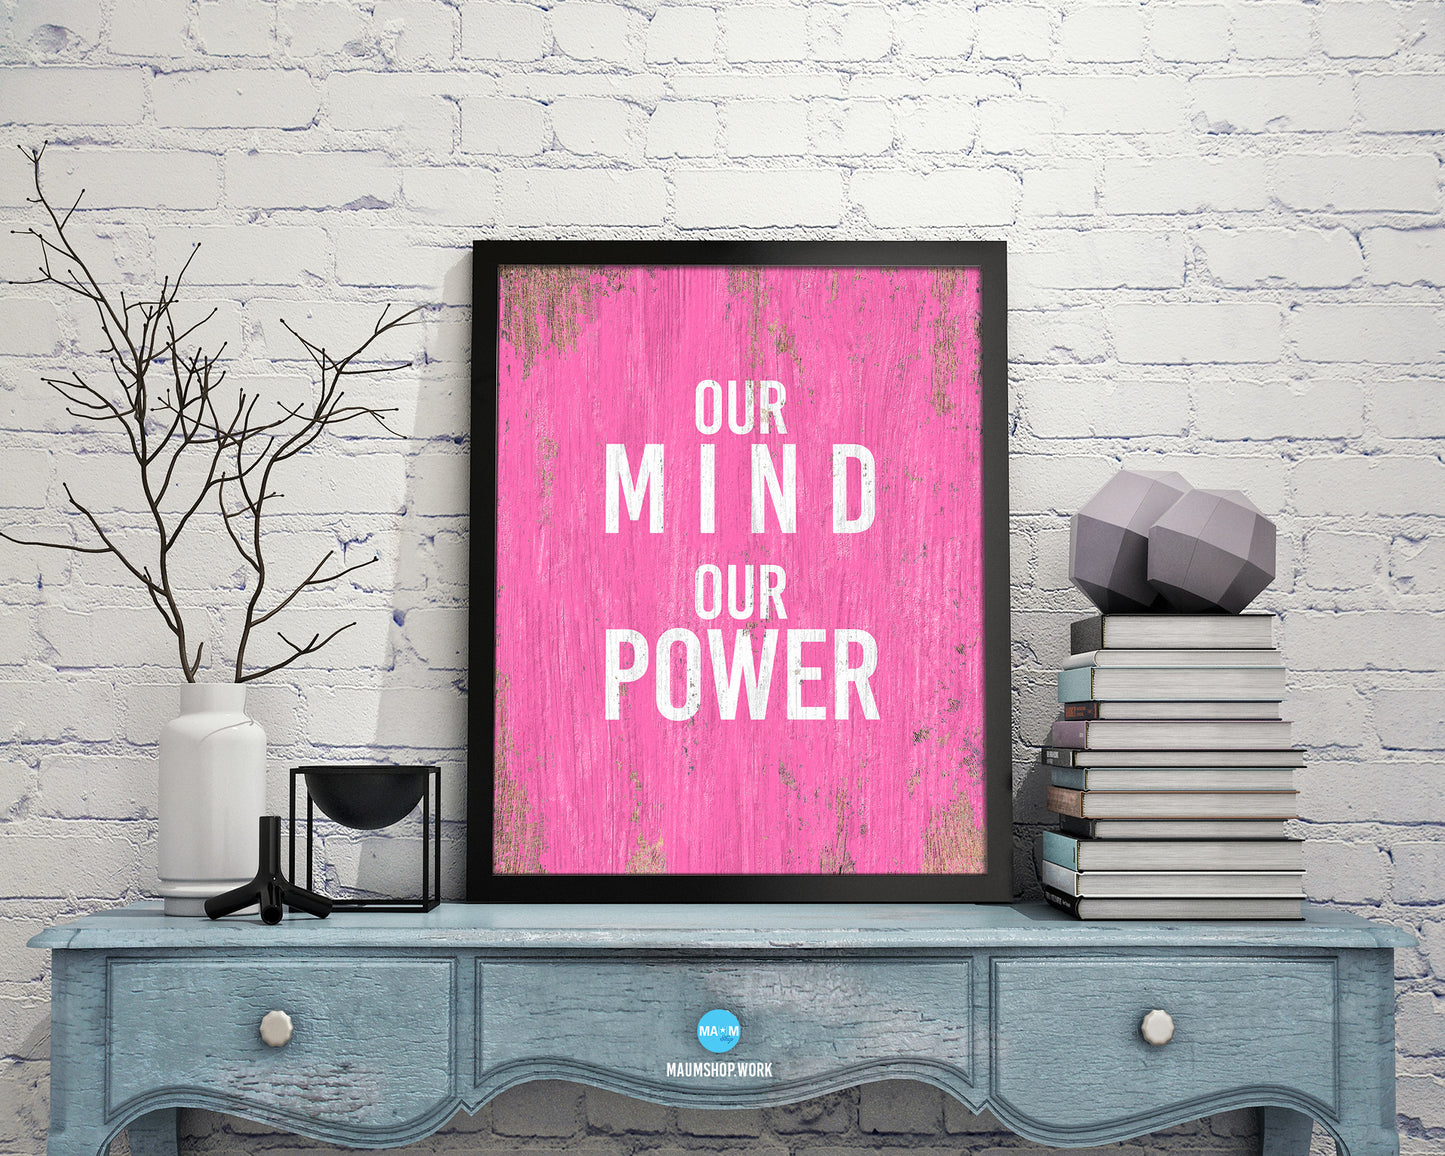 Our Minds Our Power Rainbow Pride Peace Right Justice Poster Wood Framed Wall Decor Print Gifts